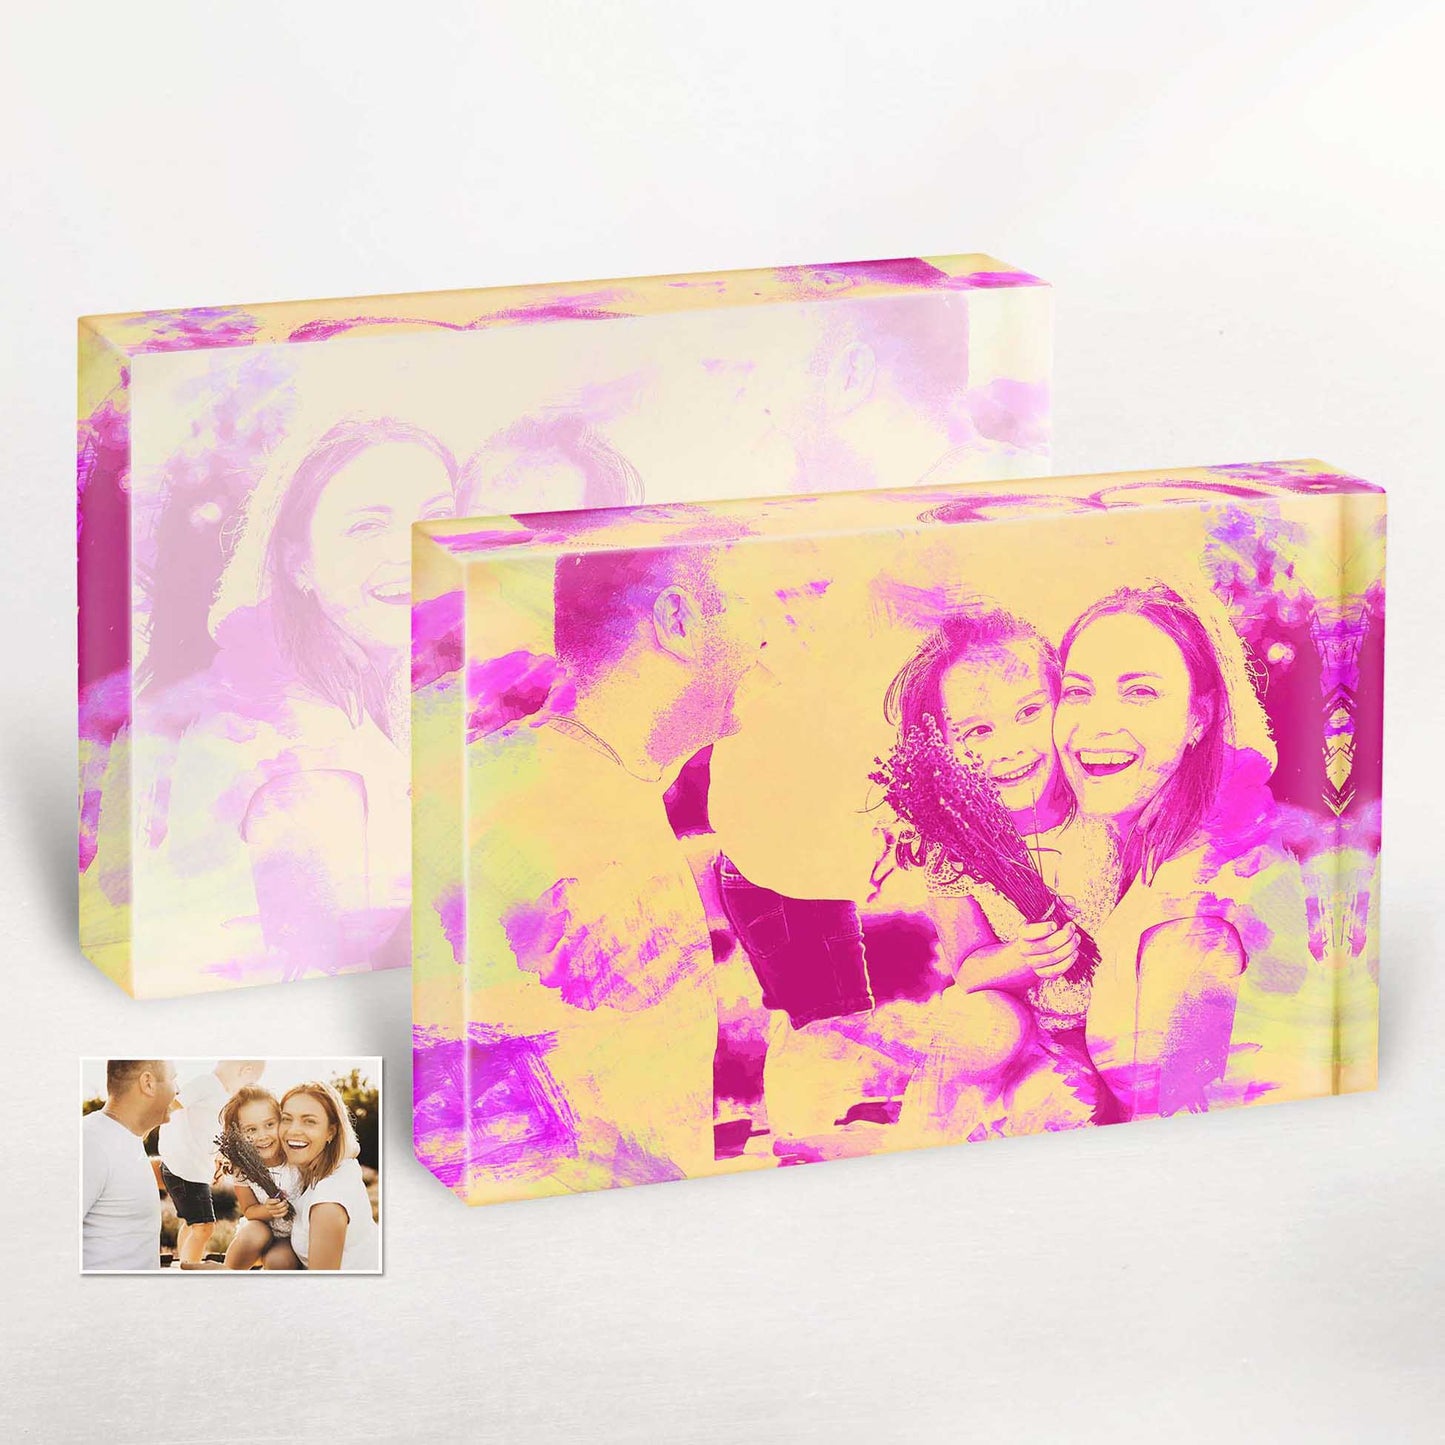 Add a touch of artistic flair with our Personalised Pink and Yellow Watercolor Acrylic Block Photo. Its vibrant and captivating colors bring a cool and refreshing vibe to any space, making it a unique and memorable gift for anniversaries or birthdays.